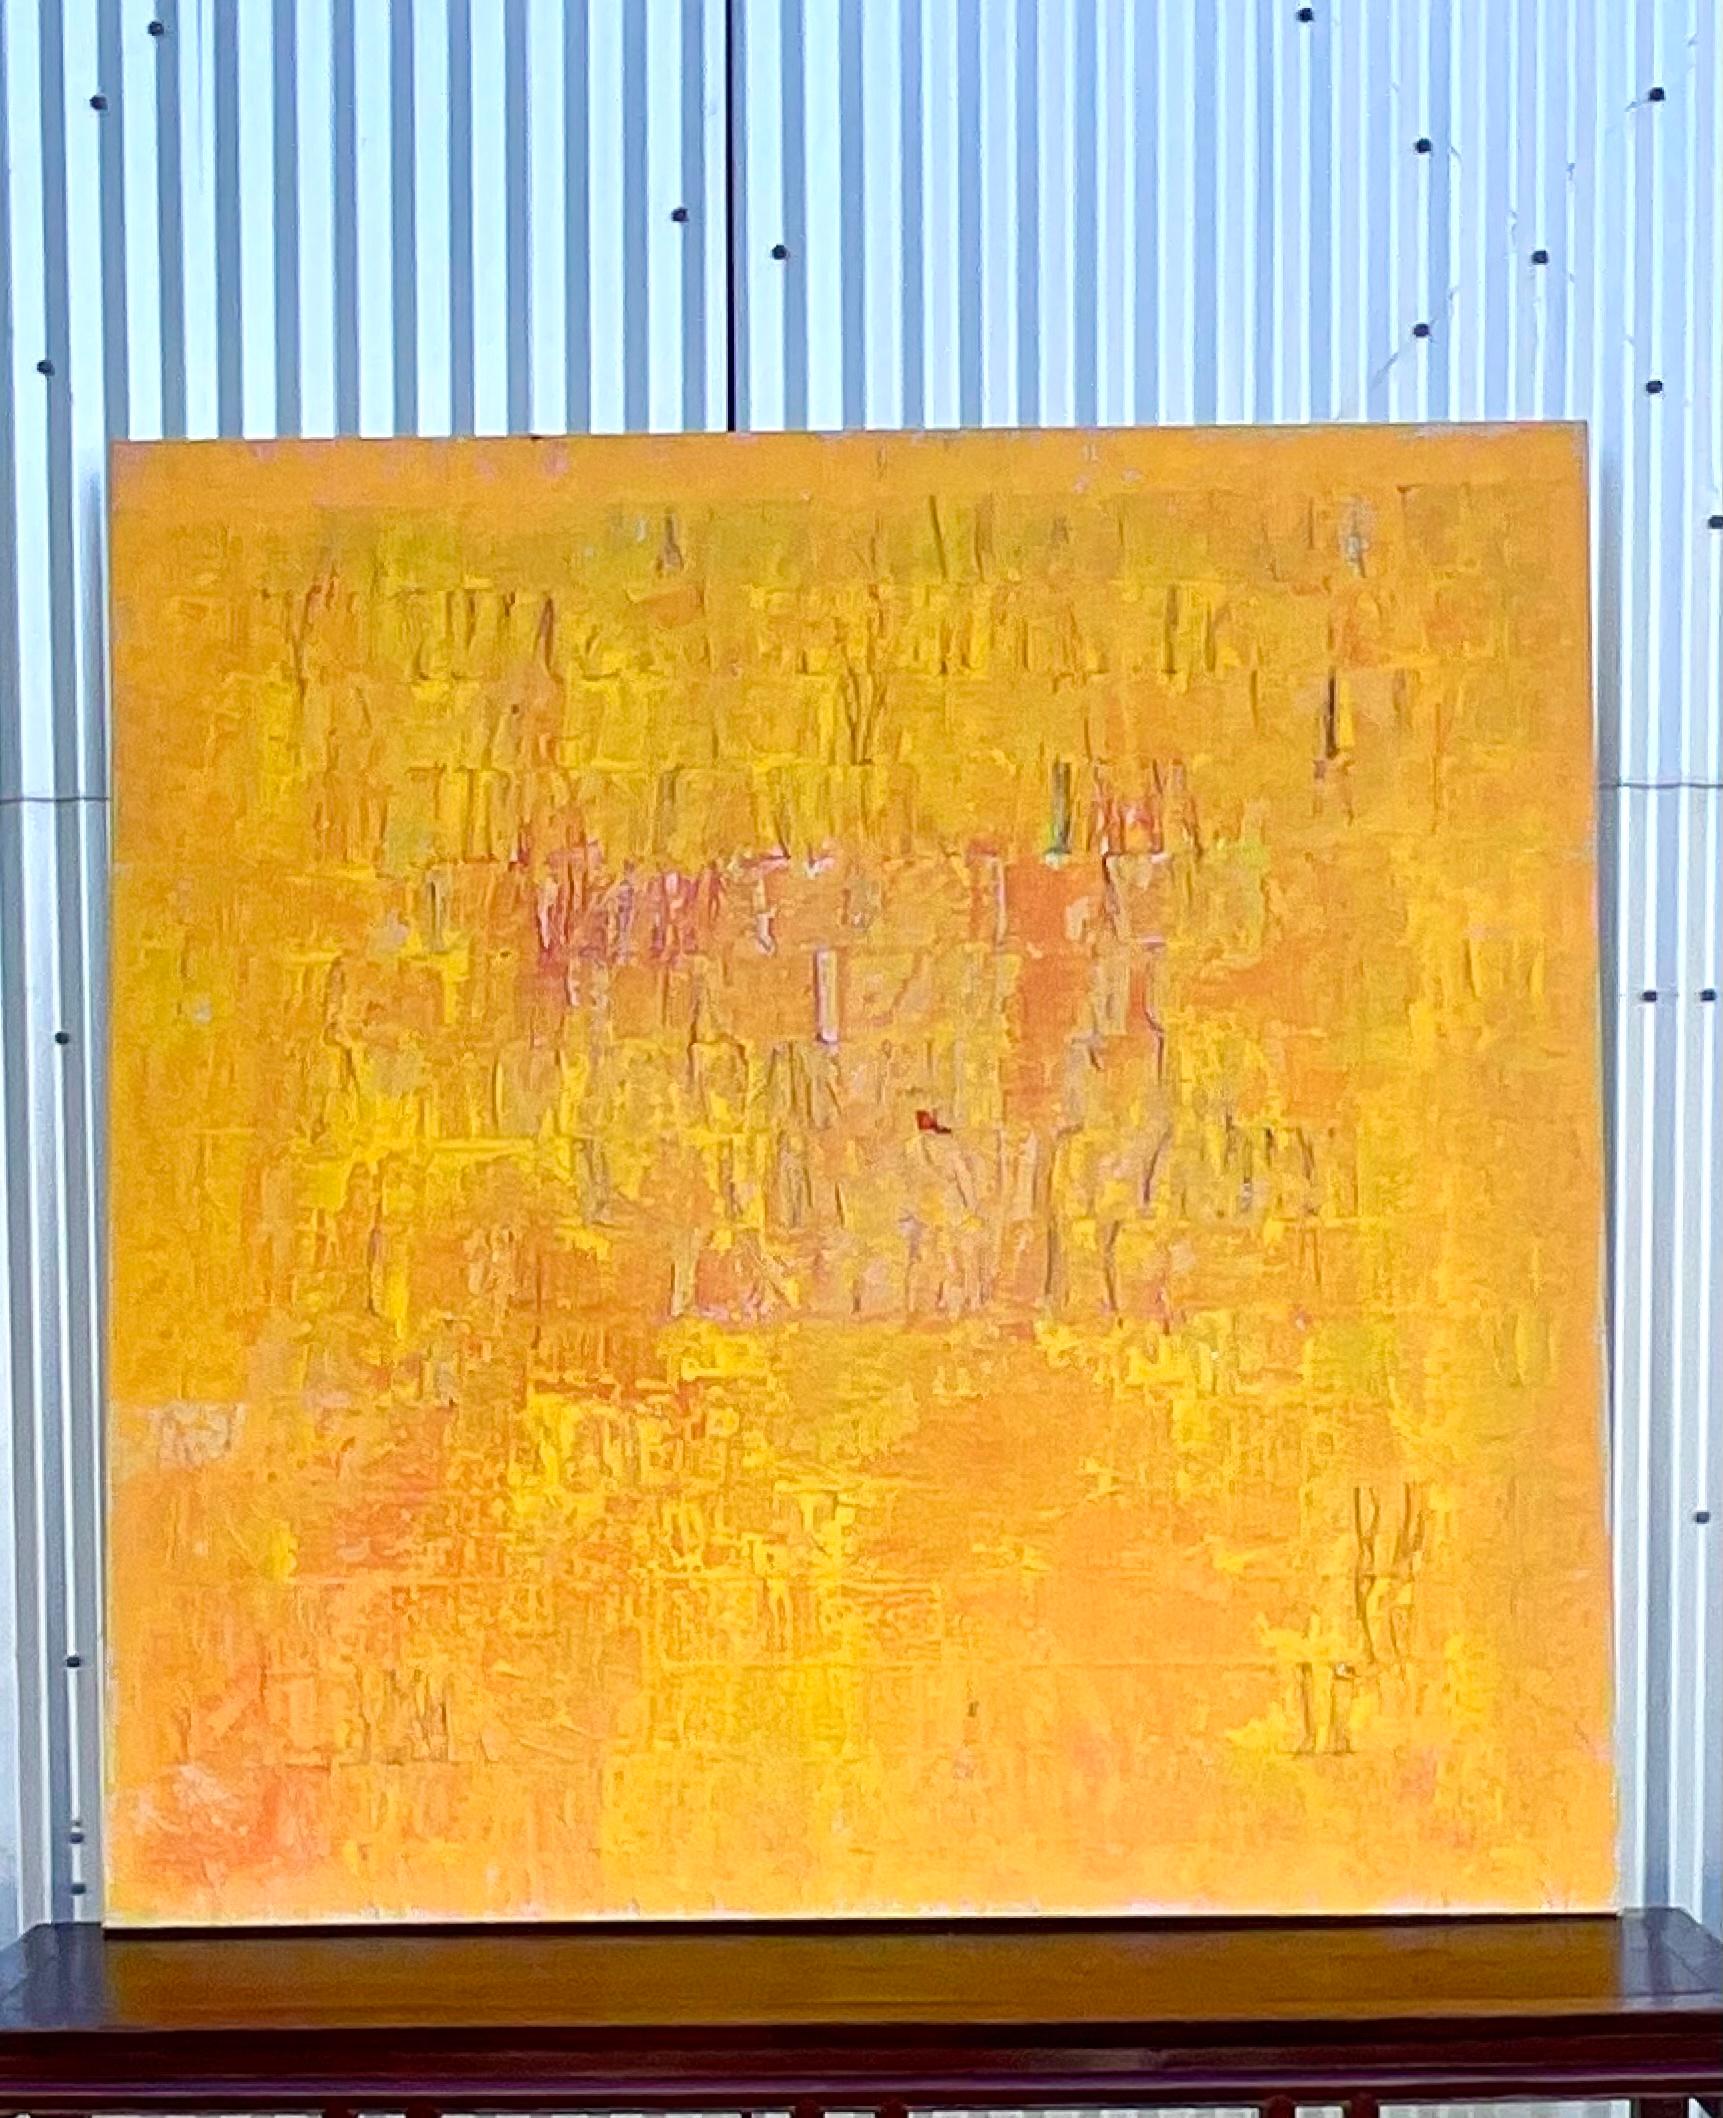 Incredible vintage strait mixed media painting. Monumental in size with bold color composition. Mixed media design. Signed by the artist Hector Lombardi, 1978. Acquired from a Palm Beach estate.